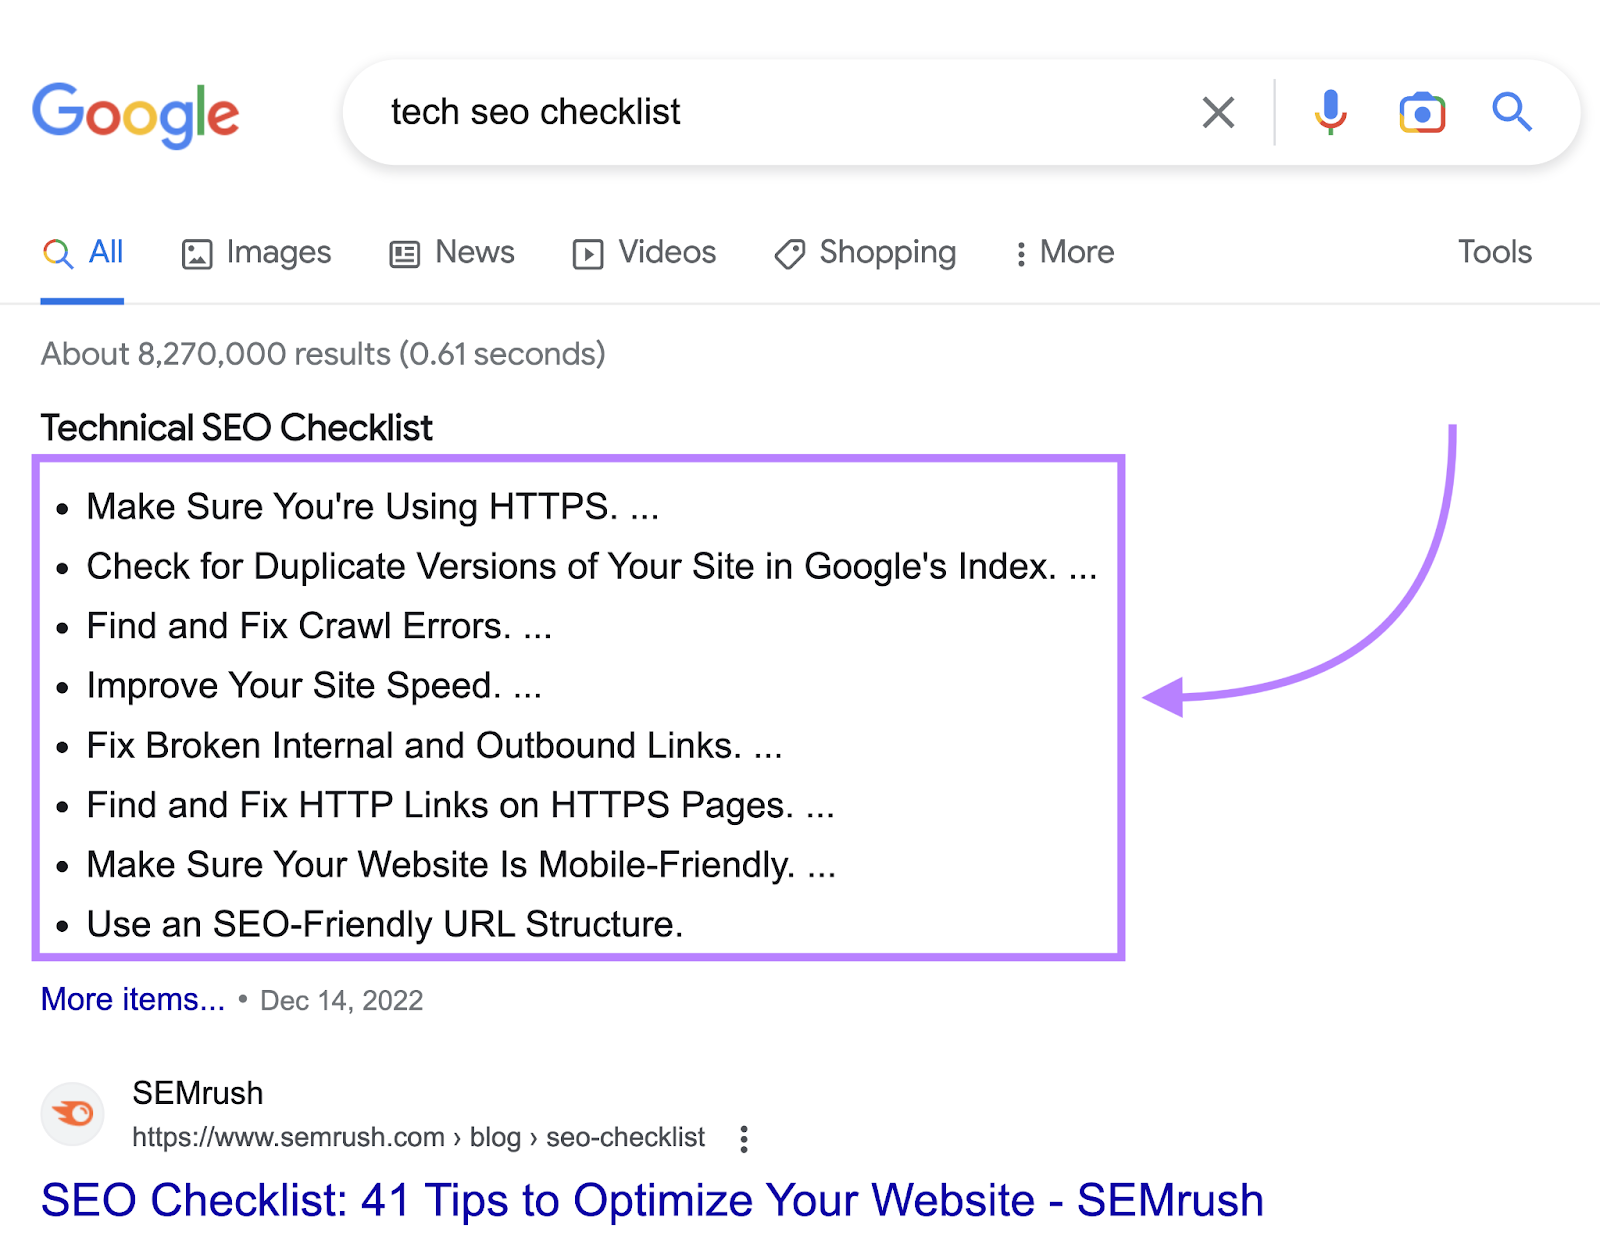 Featured snippet in Google search